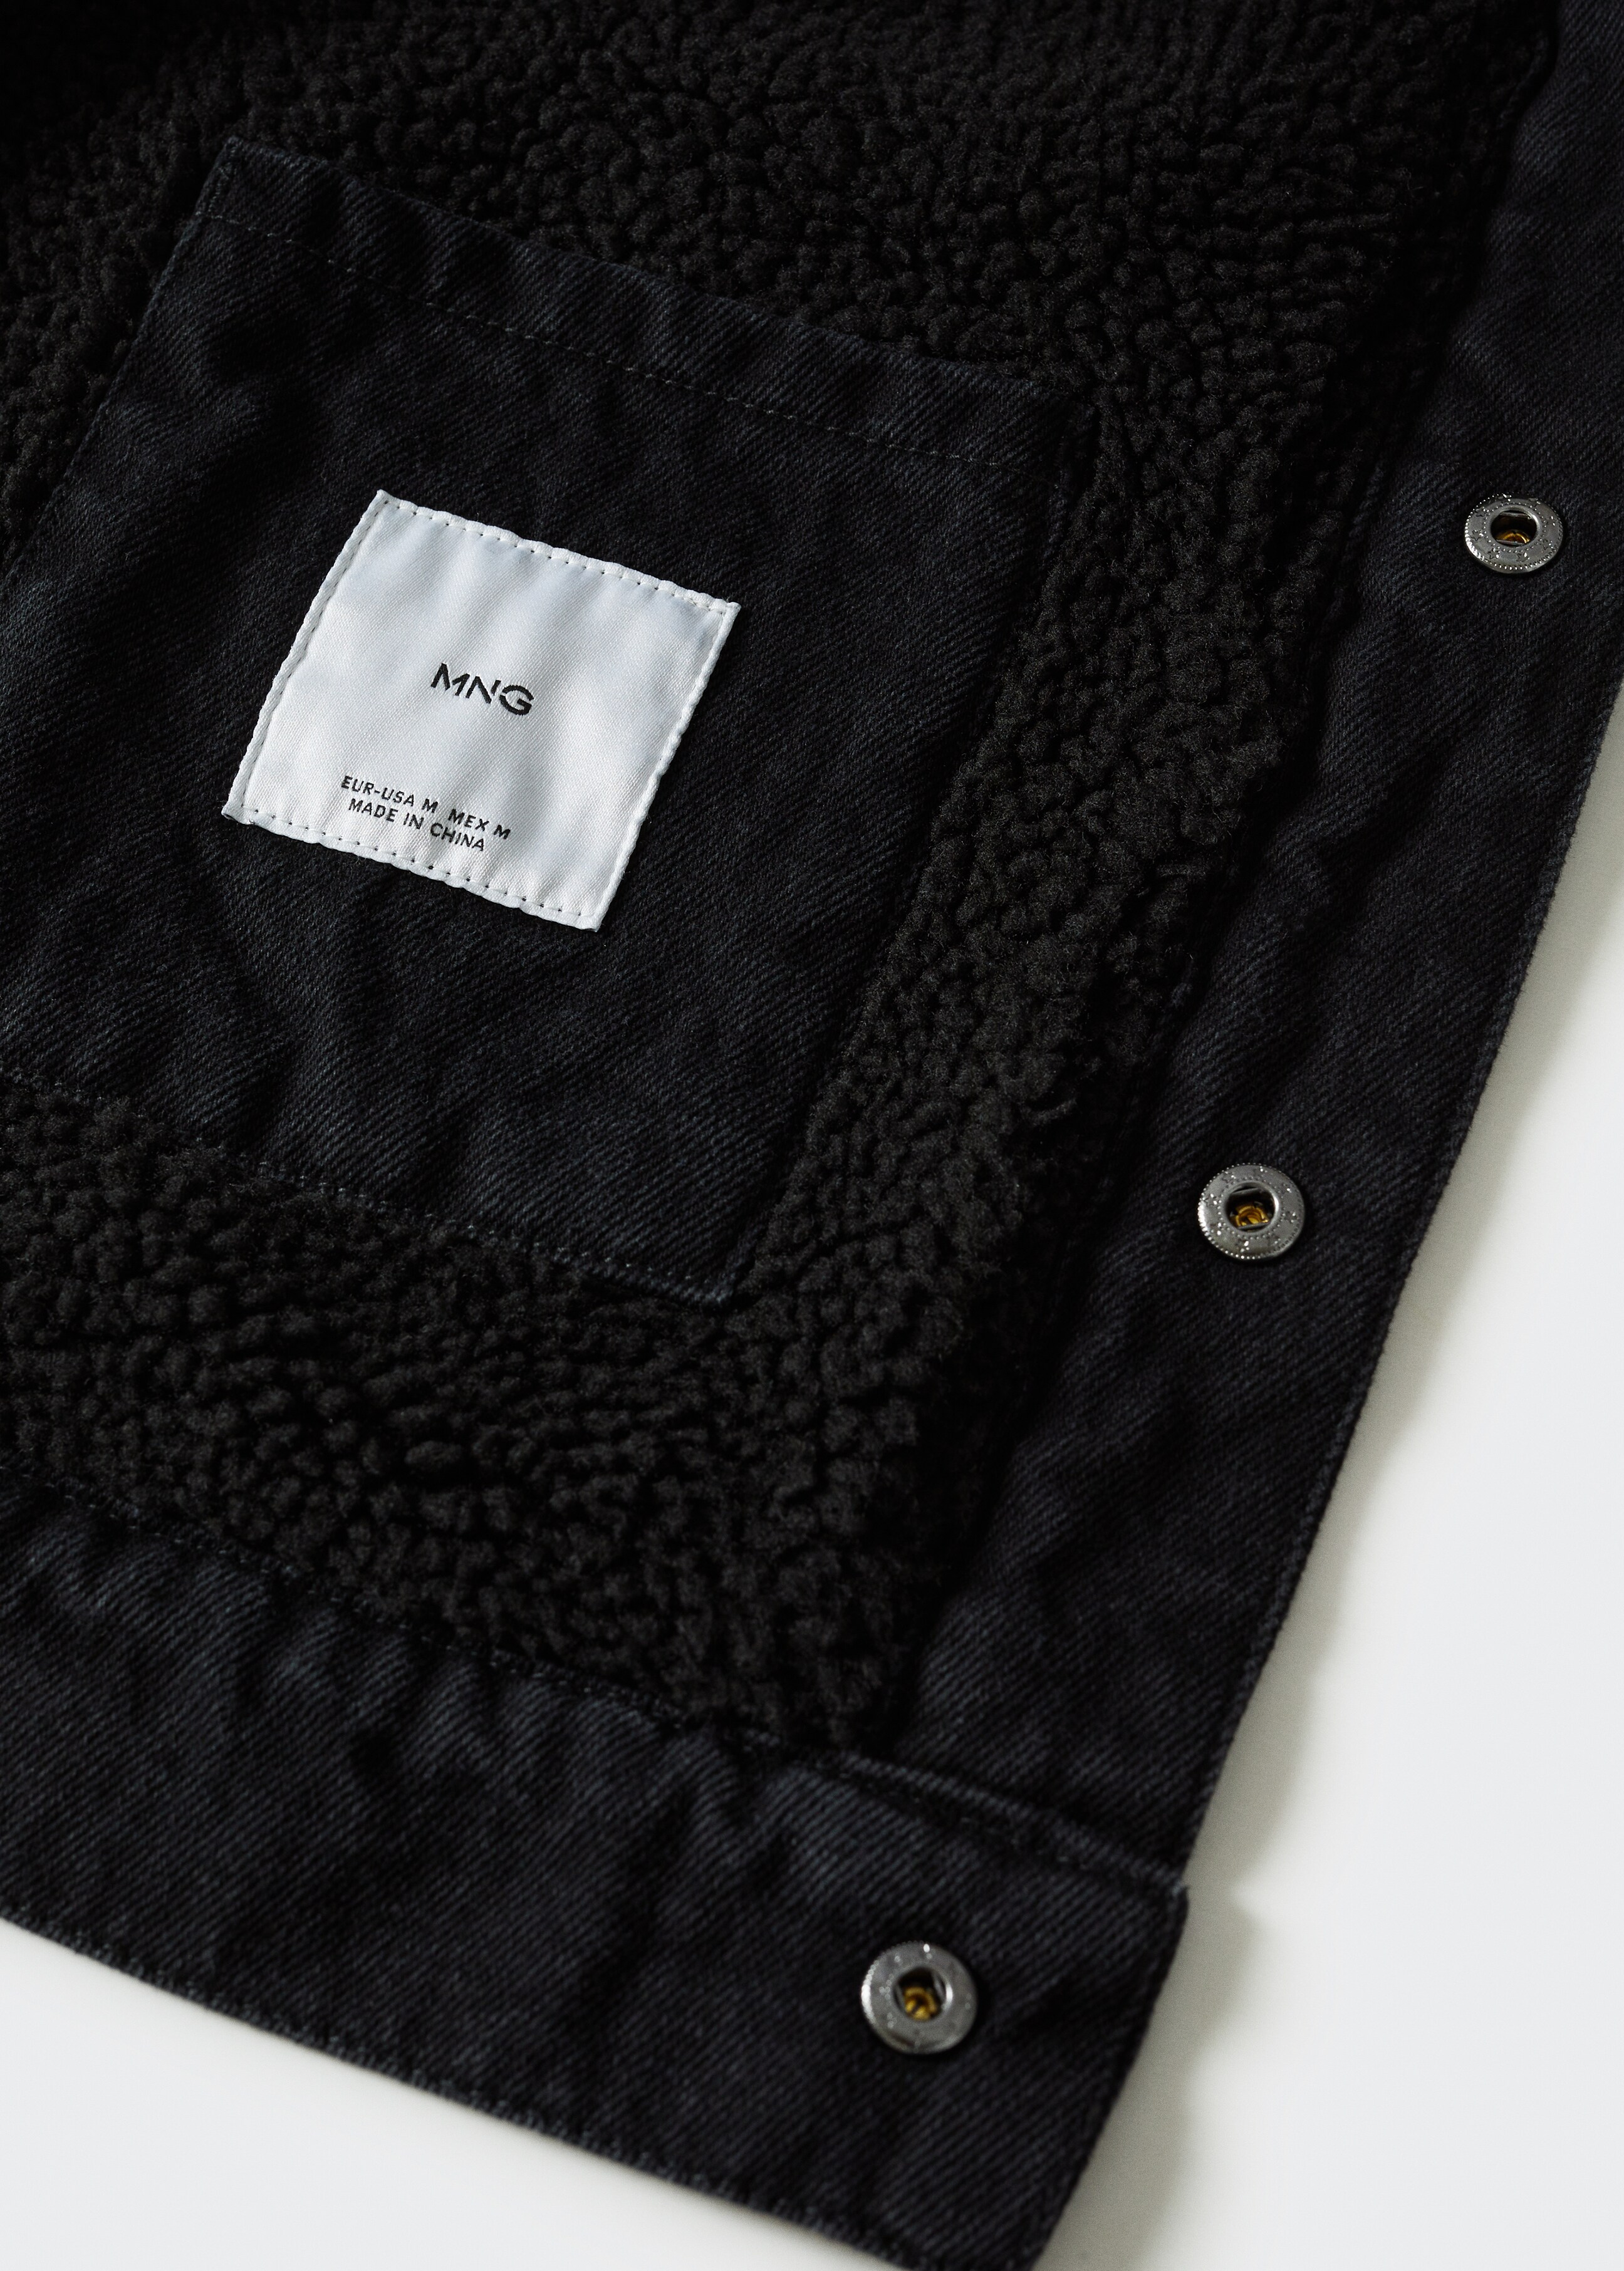 Shearling denim jacket - Details of the article 8